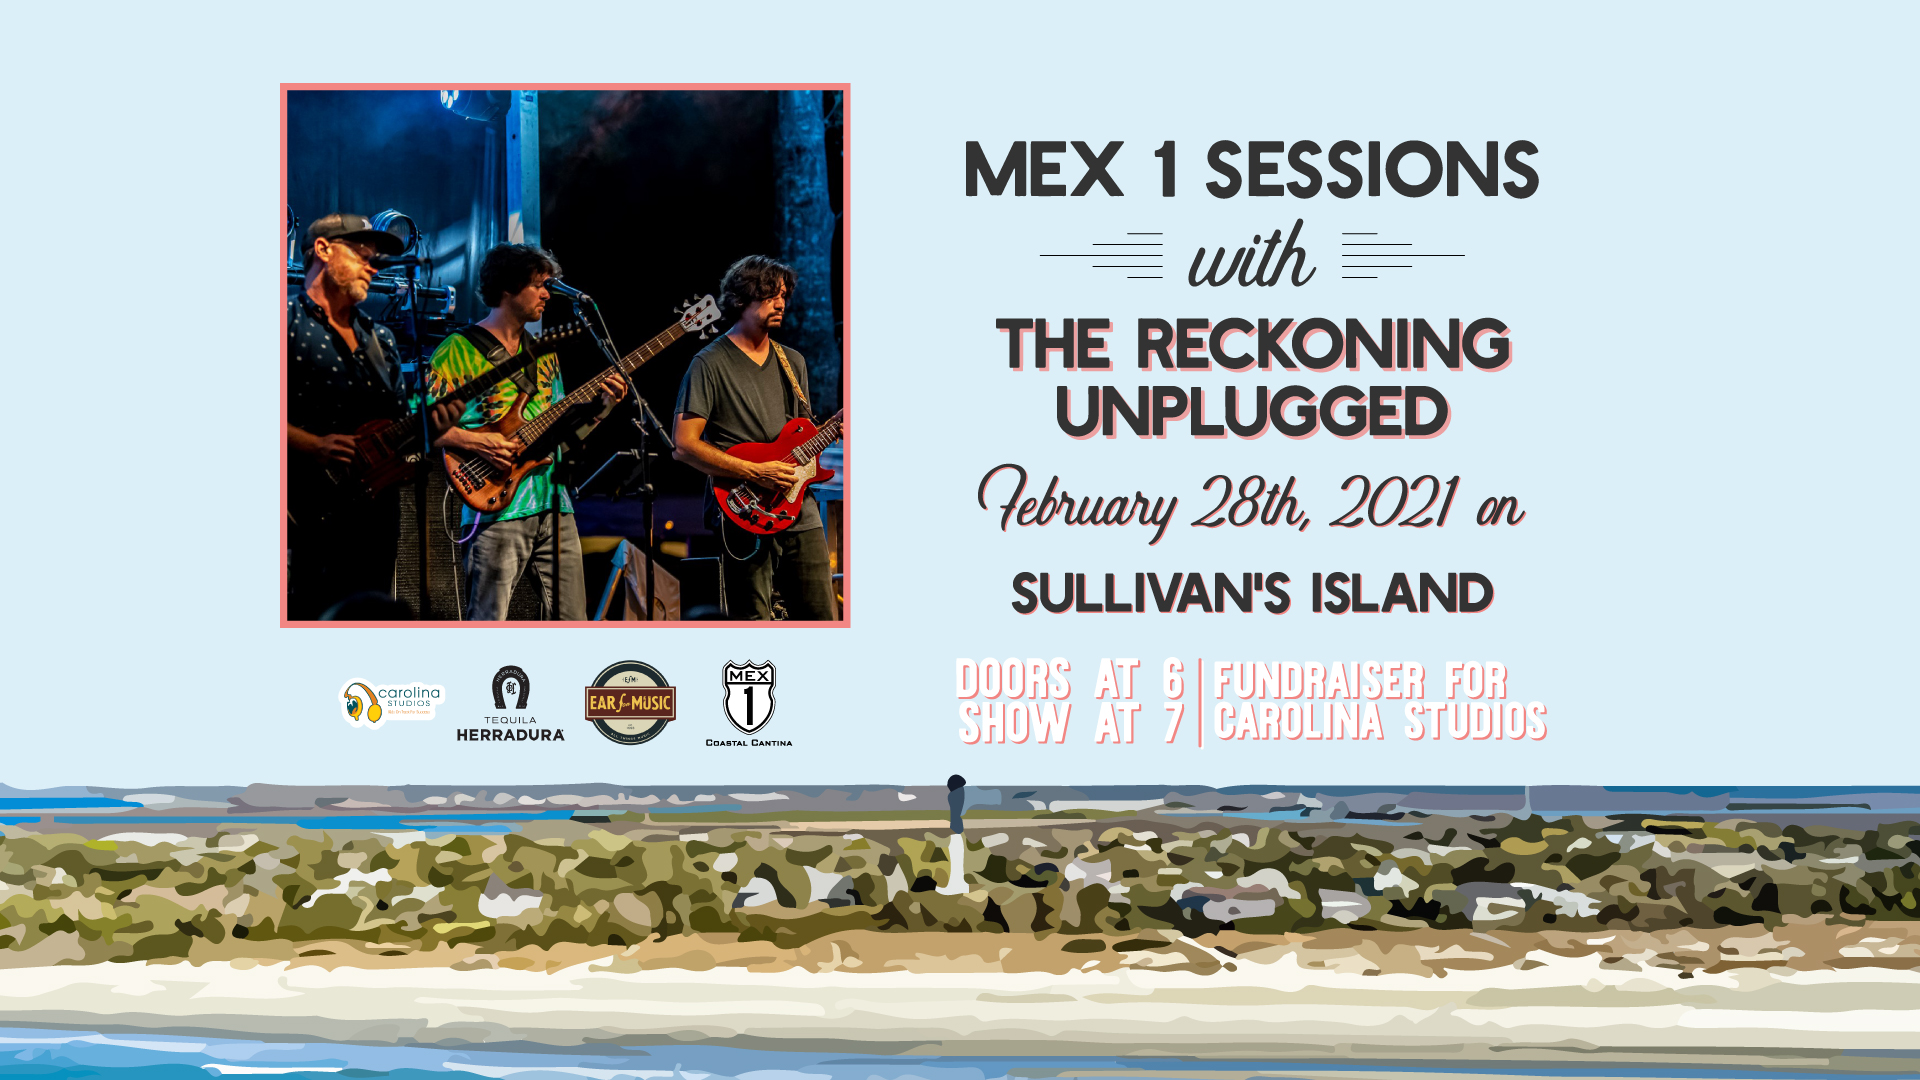 Mex 1 Sessions with the Reckoning Unplugged Sunday, February 28th